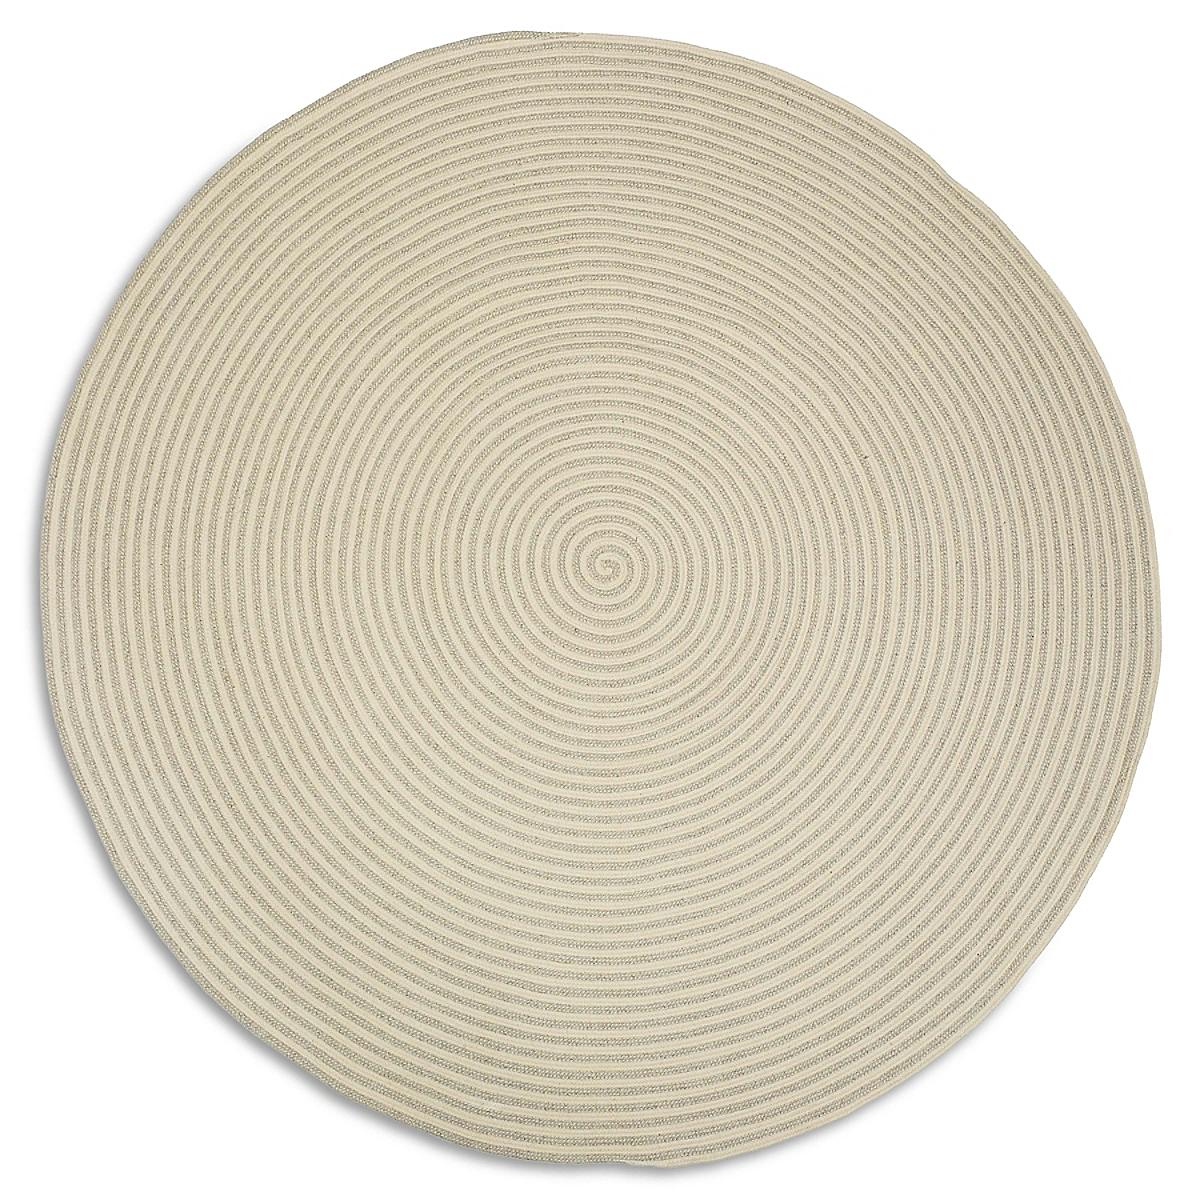 Whirley Wool Rug - Oyster